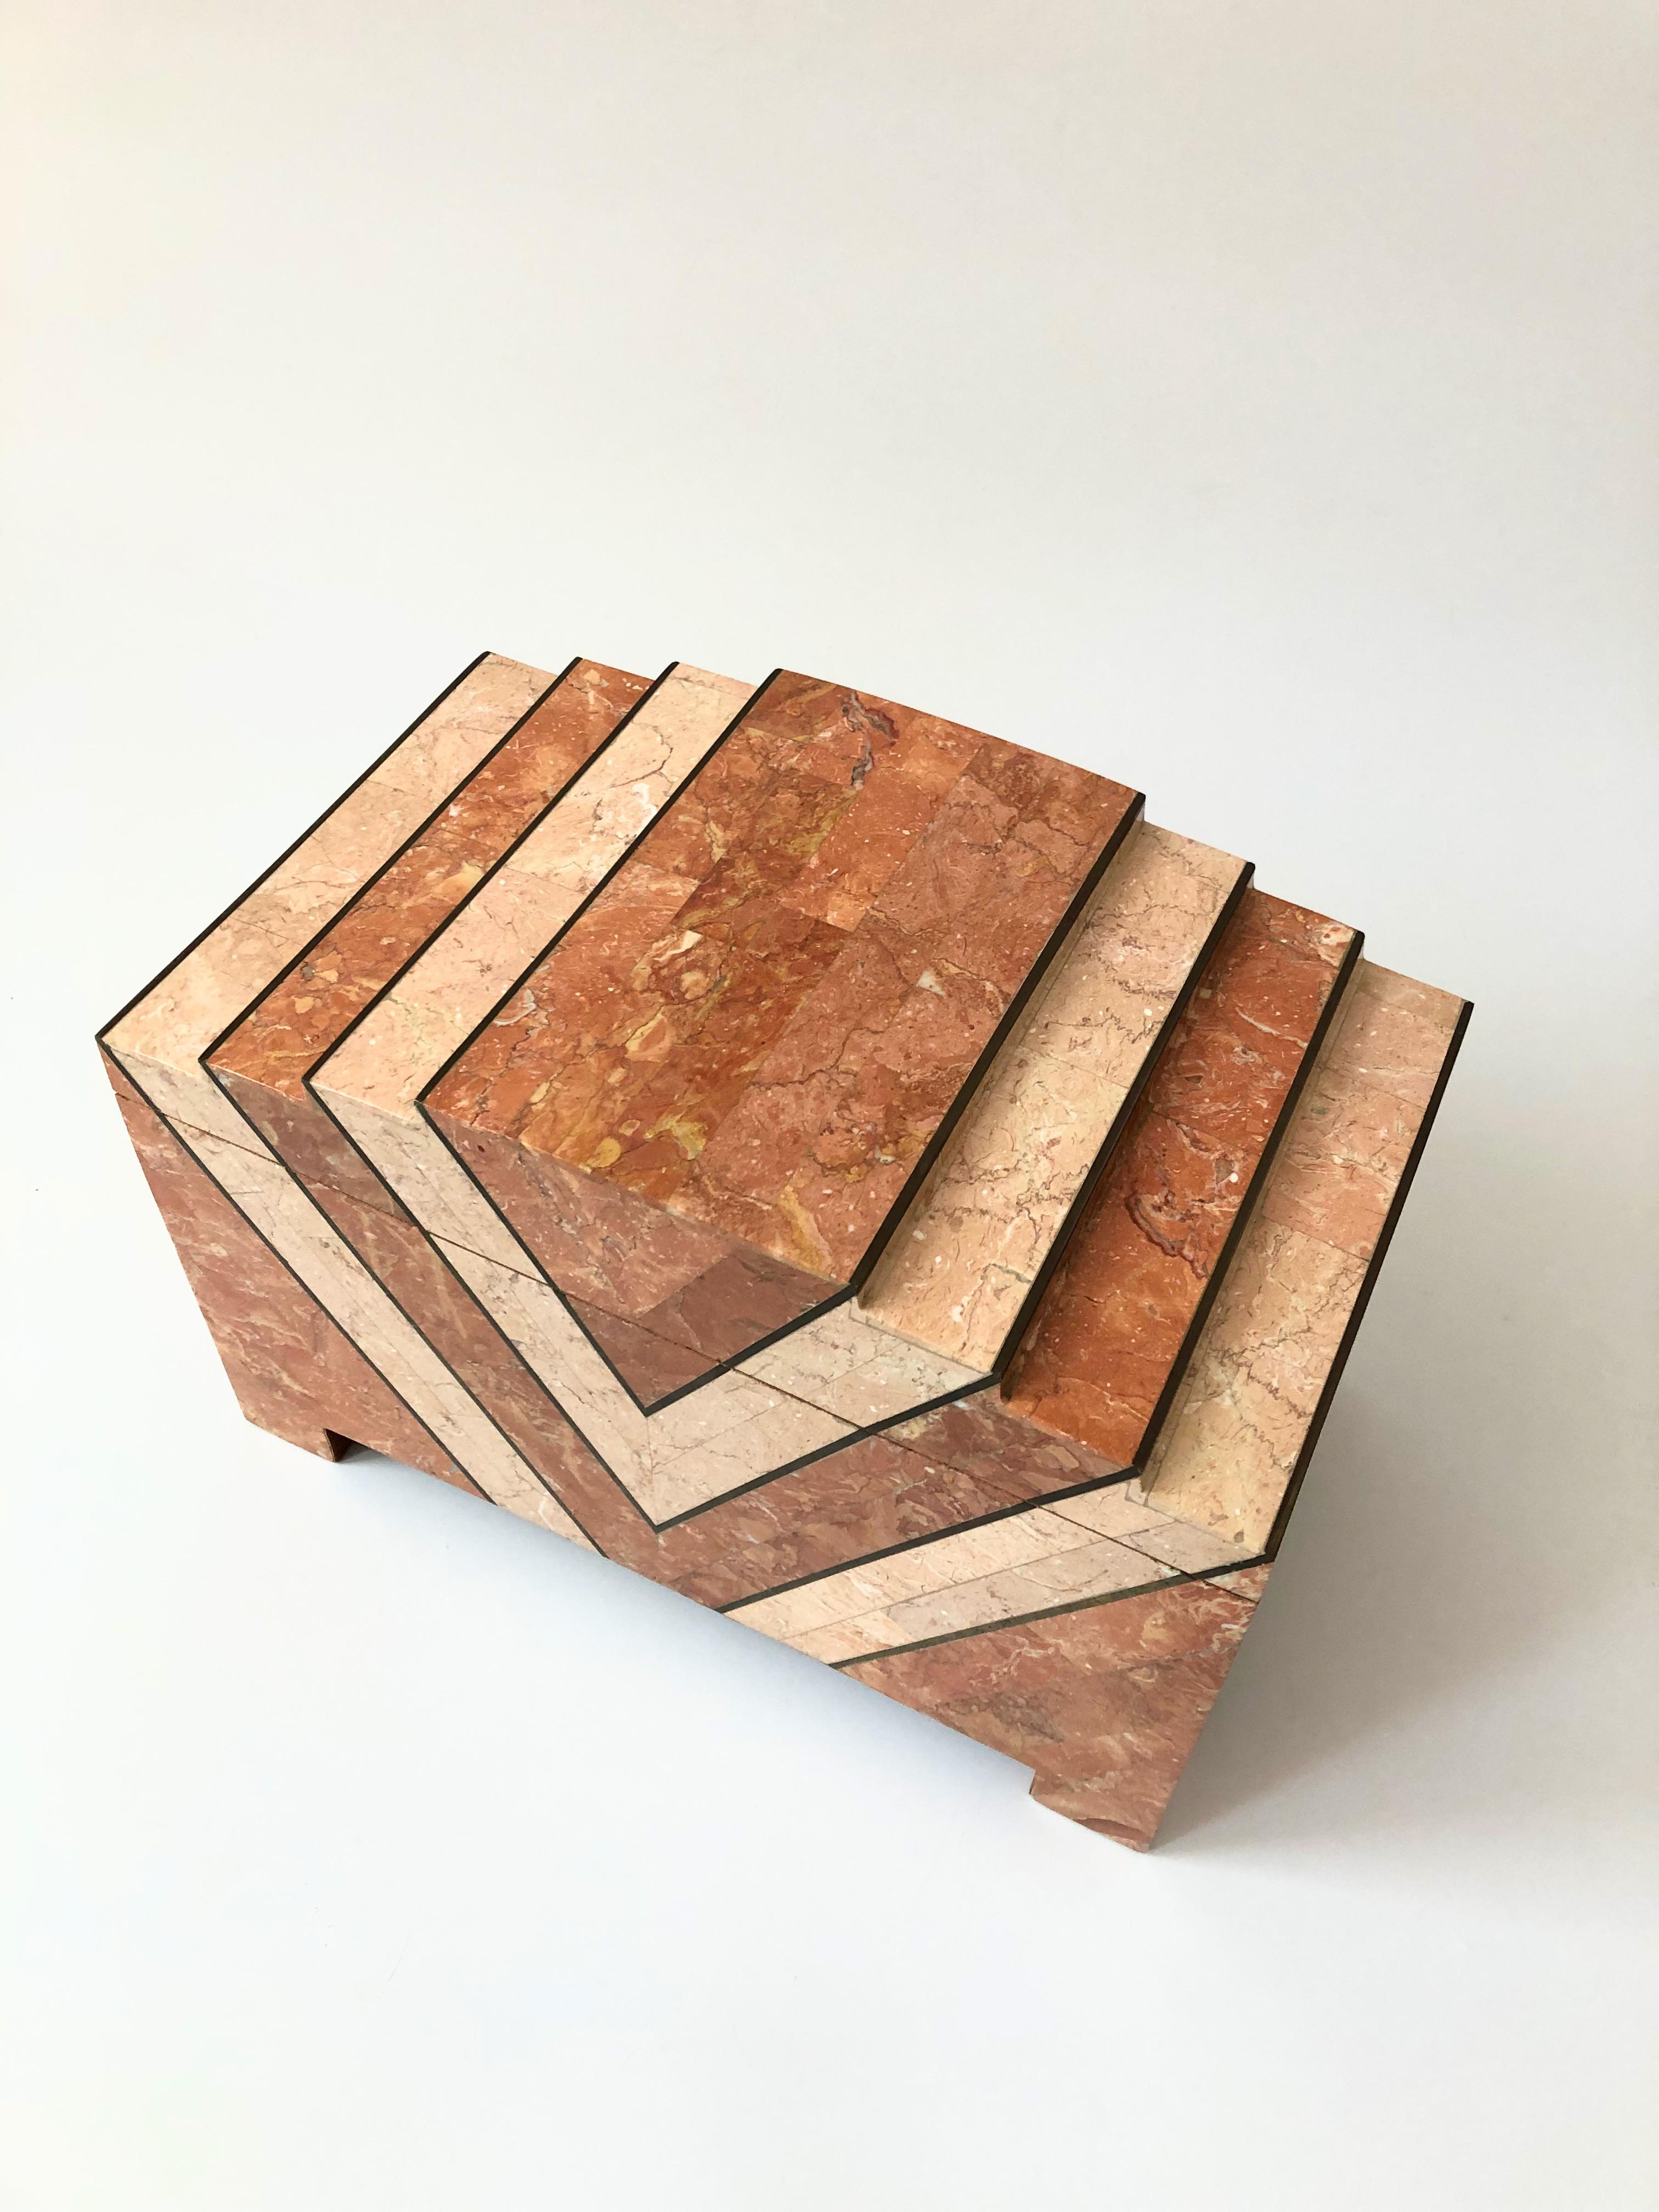 A vintage tessellated stone box made by Maitland Smith in the 1970s. Features two toned tessellated pink stone separated by inlaid brass strips. The interior is lined in velvet. Nice versatile larger size, perfect for displaying as a floor piece or